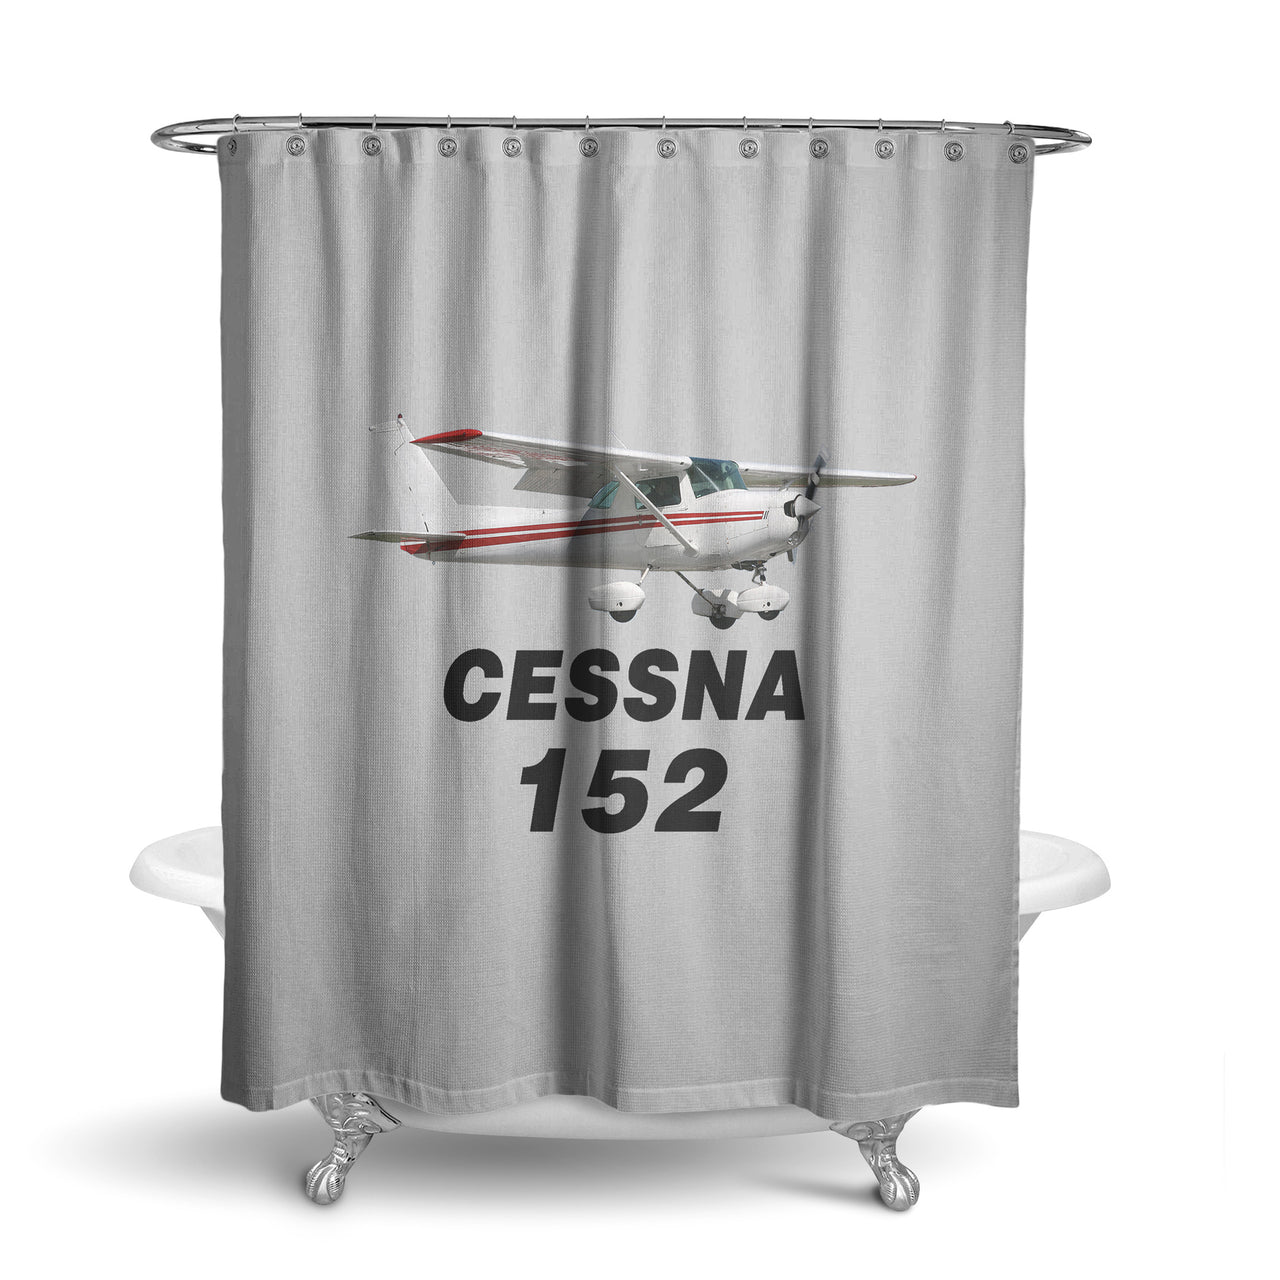 The Cessna 152 Designed Shower Curtains